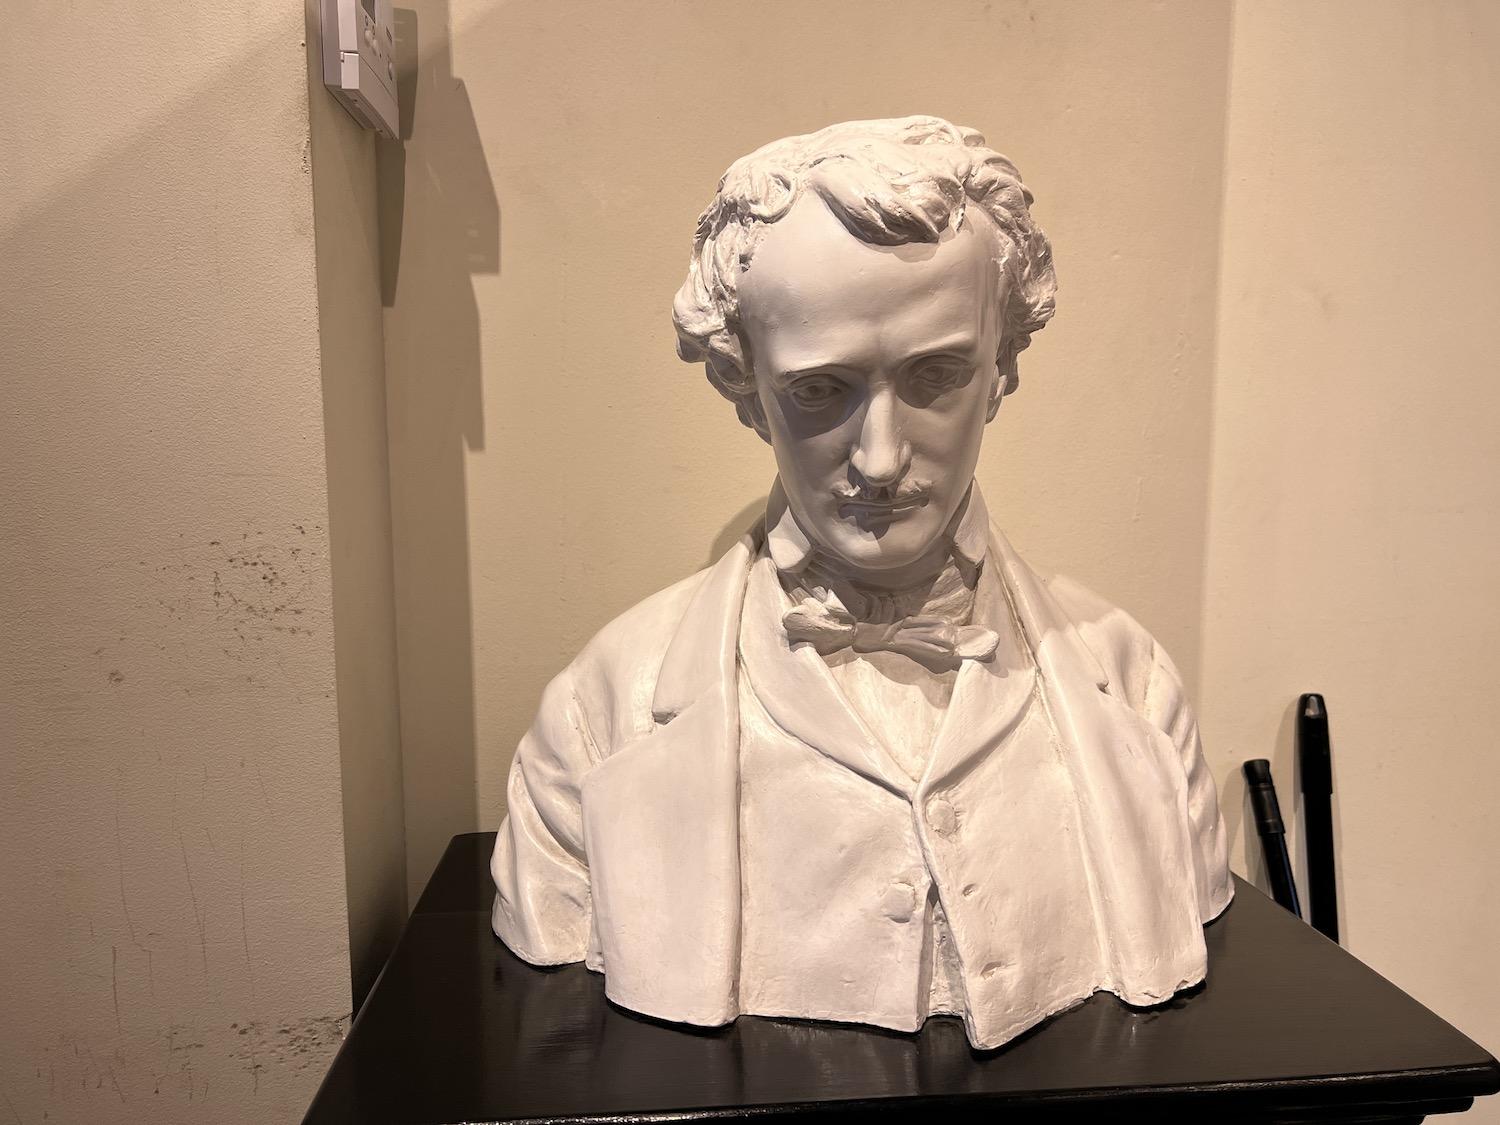 Writer Edgar Allan Poe died a mysterious death in Baltimore when he was just 40.